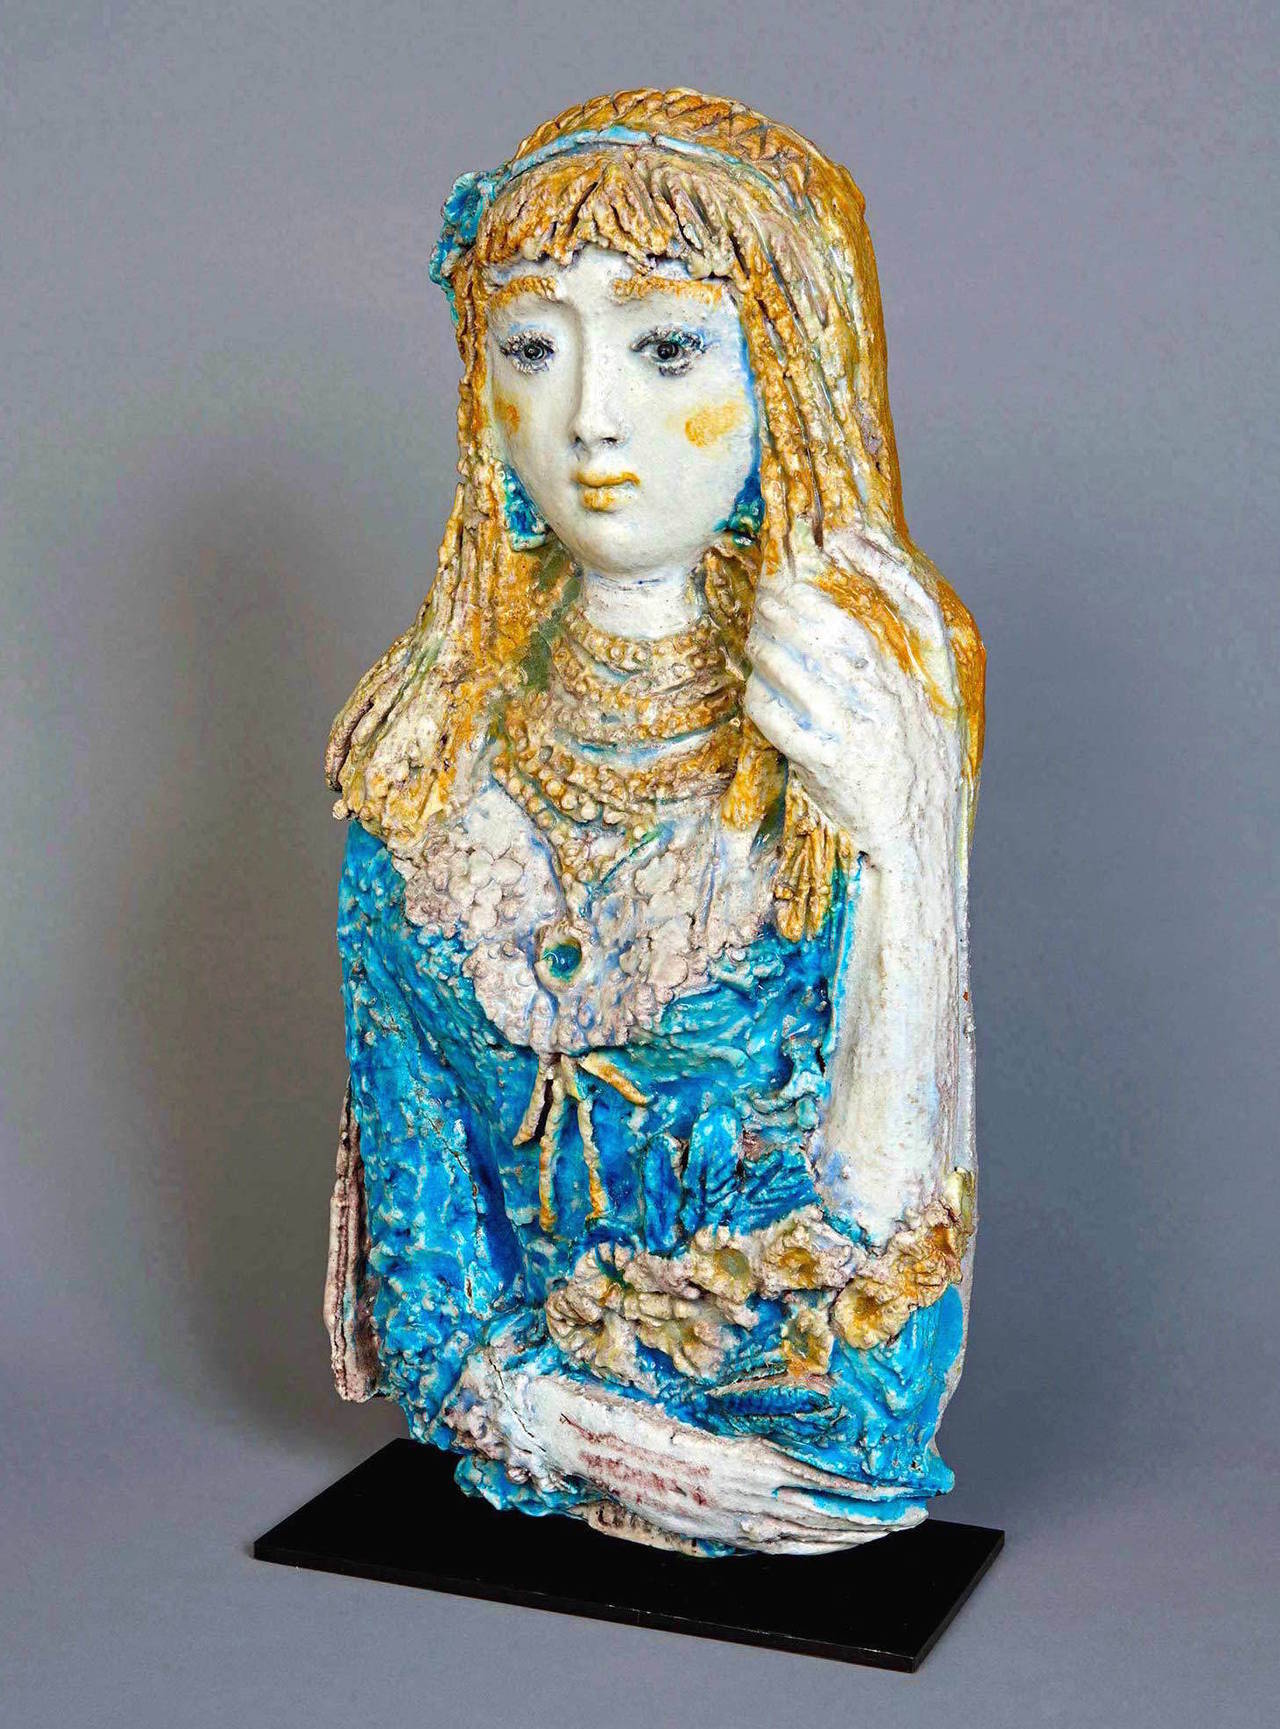 The best piece by this very idiosyncratic artist that I have seen in many years. Ugo Lucerni (Italian, 1900-1989) was something of a 20th century Andrea della Robbia. This girl, with her enigmatic expression, has a wonderful presence in any room. A